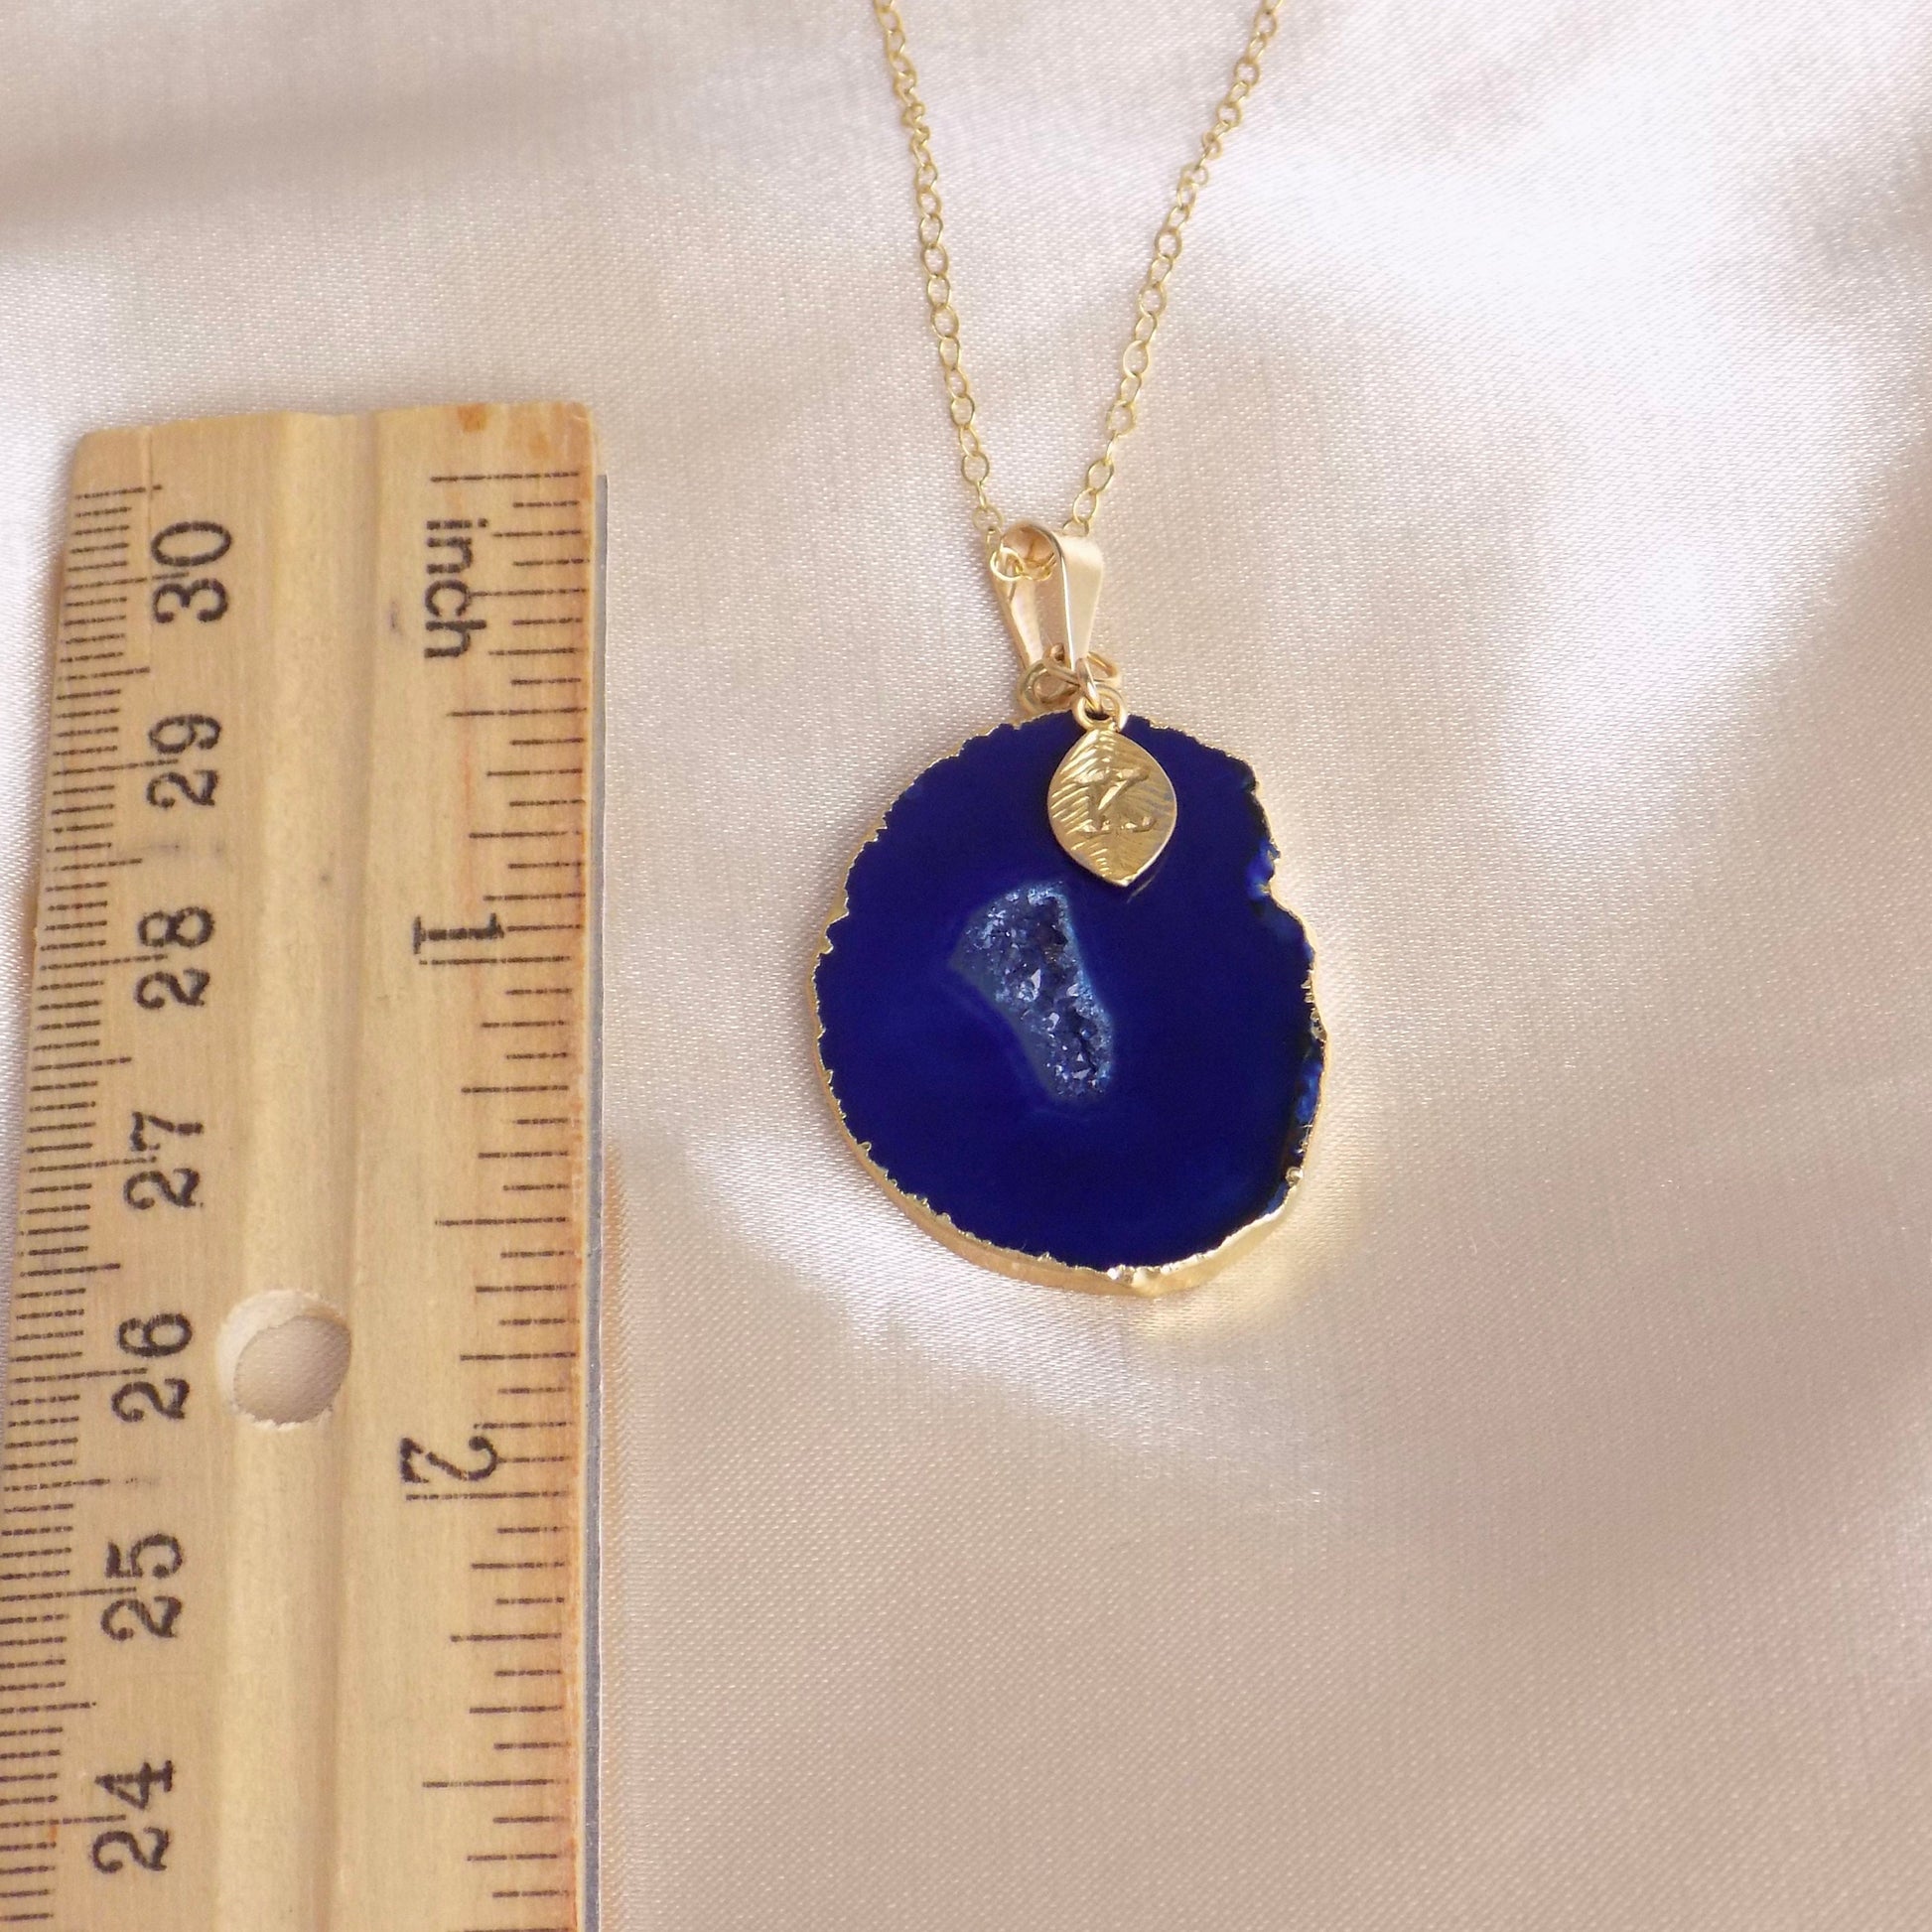 Blue Geode Necklace Gold, Personalized Gemstone Pendant, Christmas Gift Women, G14-787